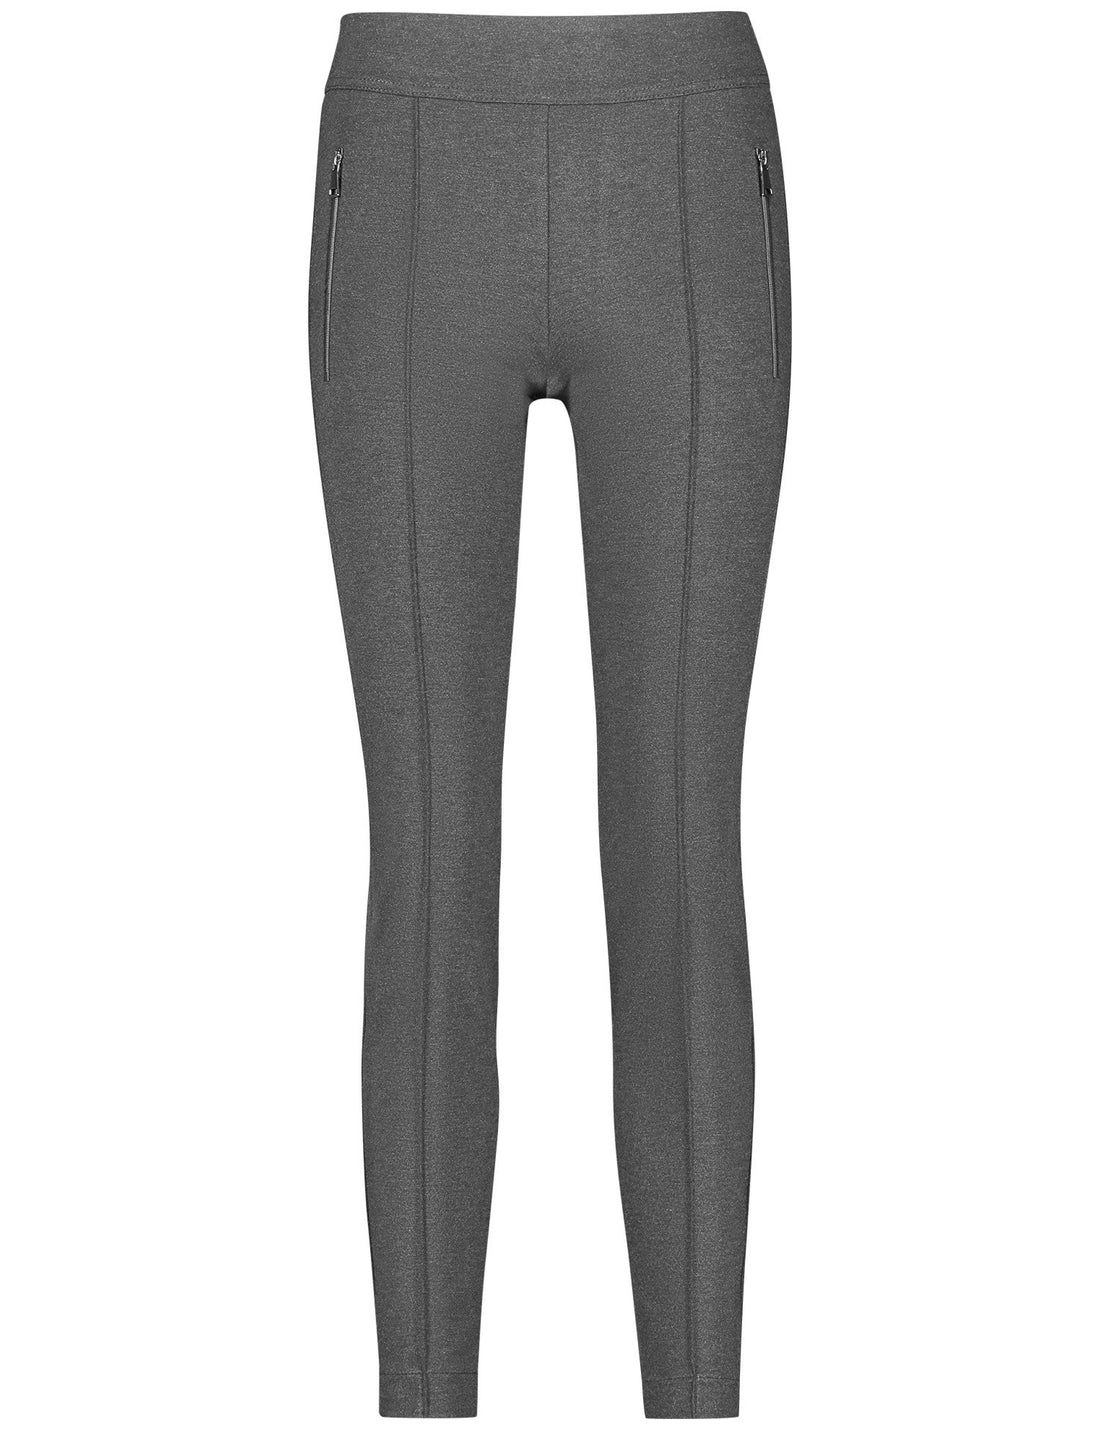 Grey Leggings With Side Zippers_122028-66275_202690_01